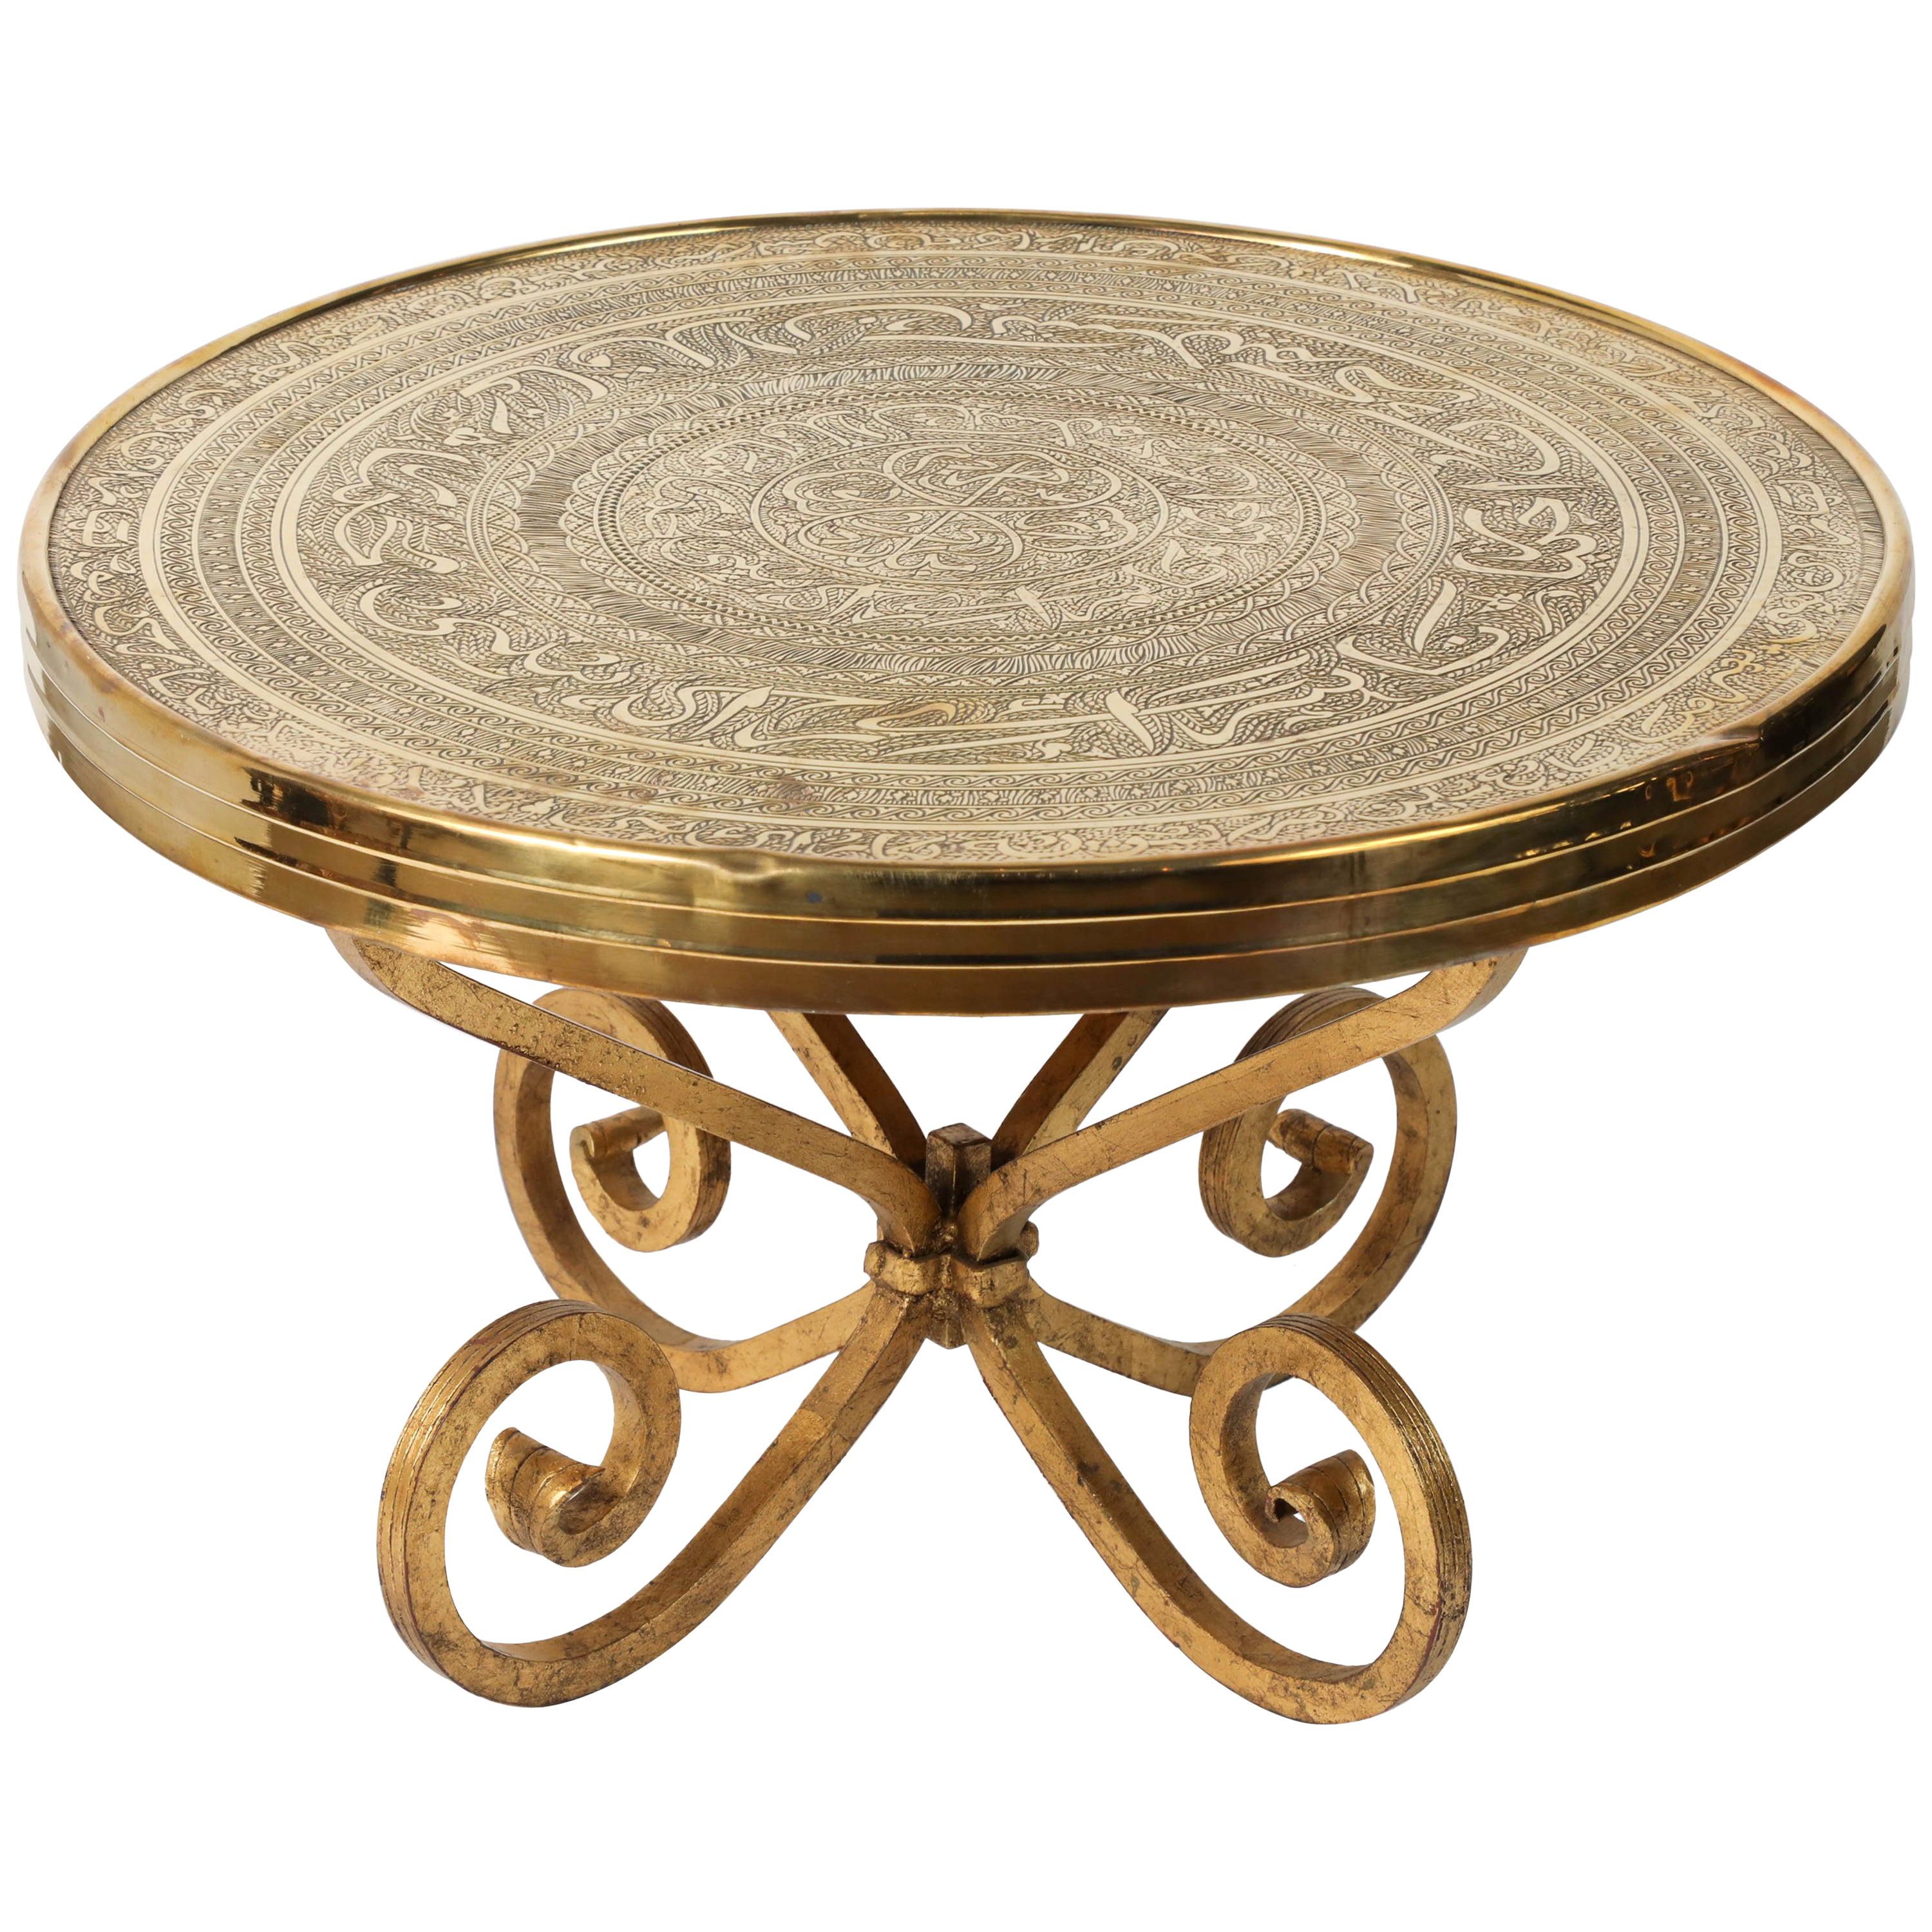 Middle Eastern Antique Brass Tray Table on Gilt Iron Stand